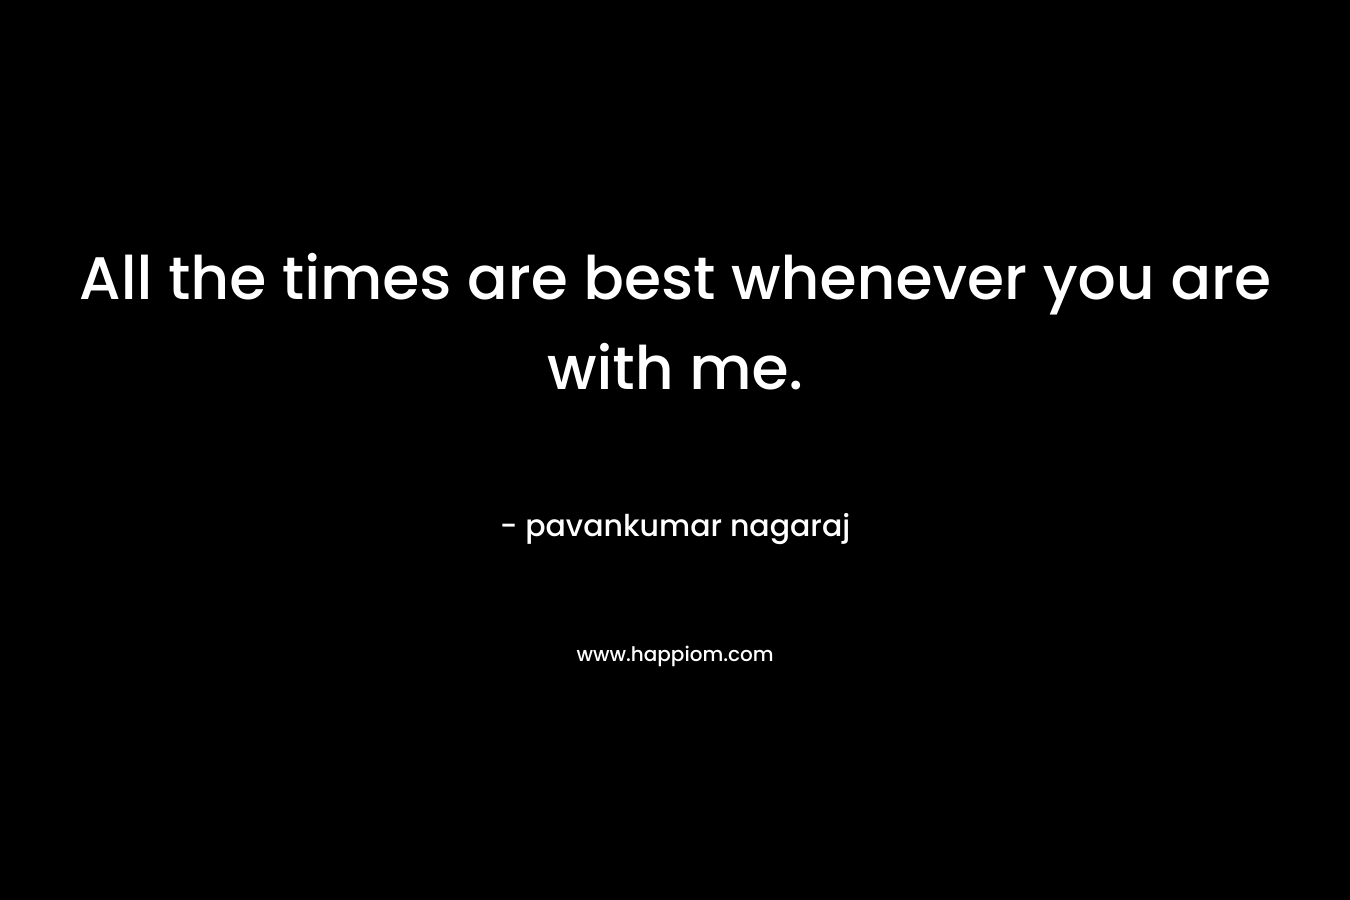 All the times are best whenever you are with me. – pavankumar nagaraj